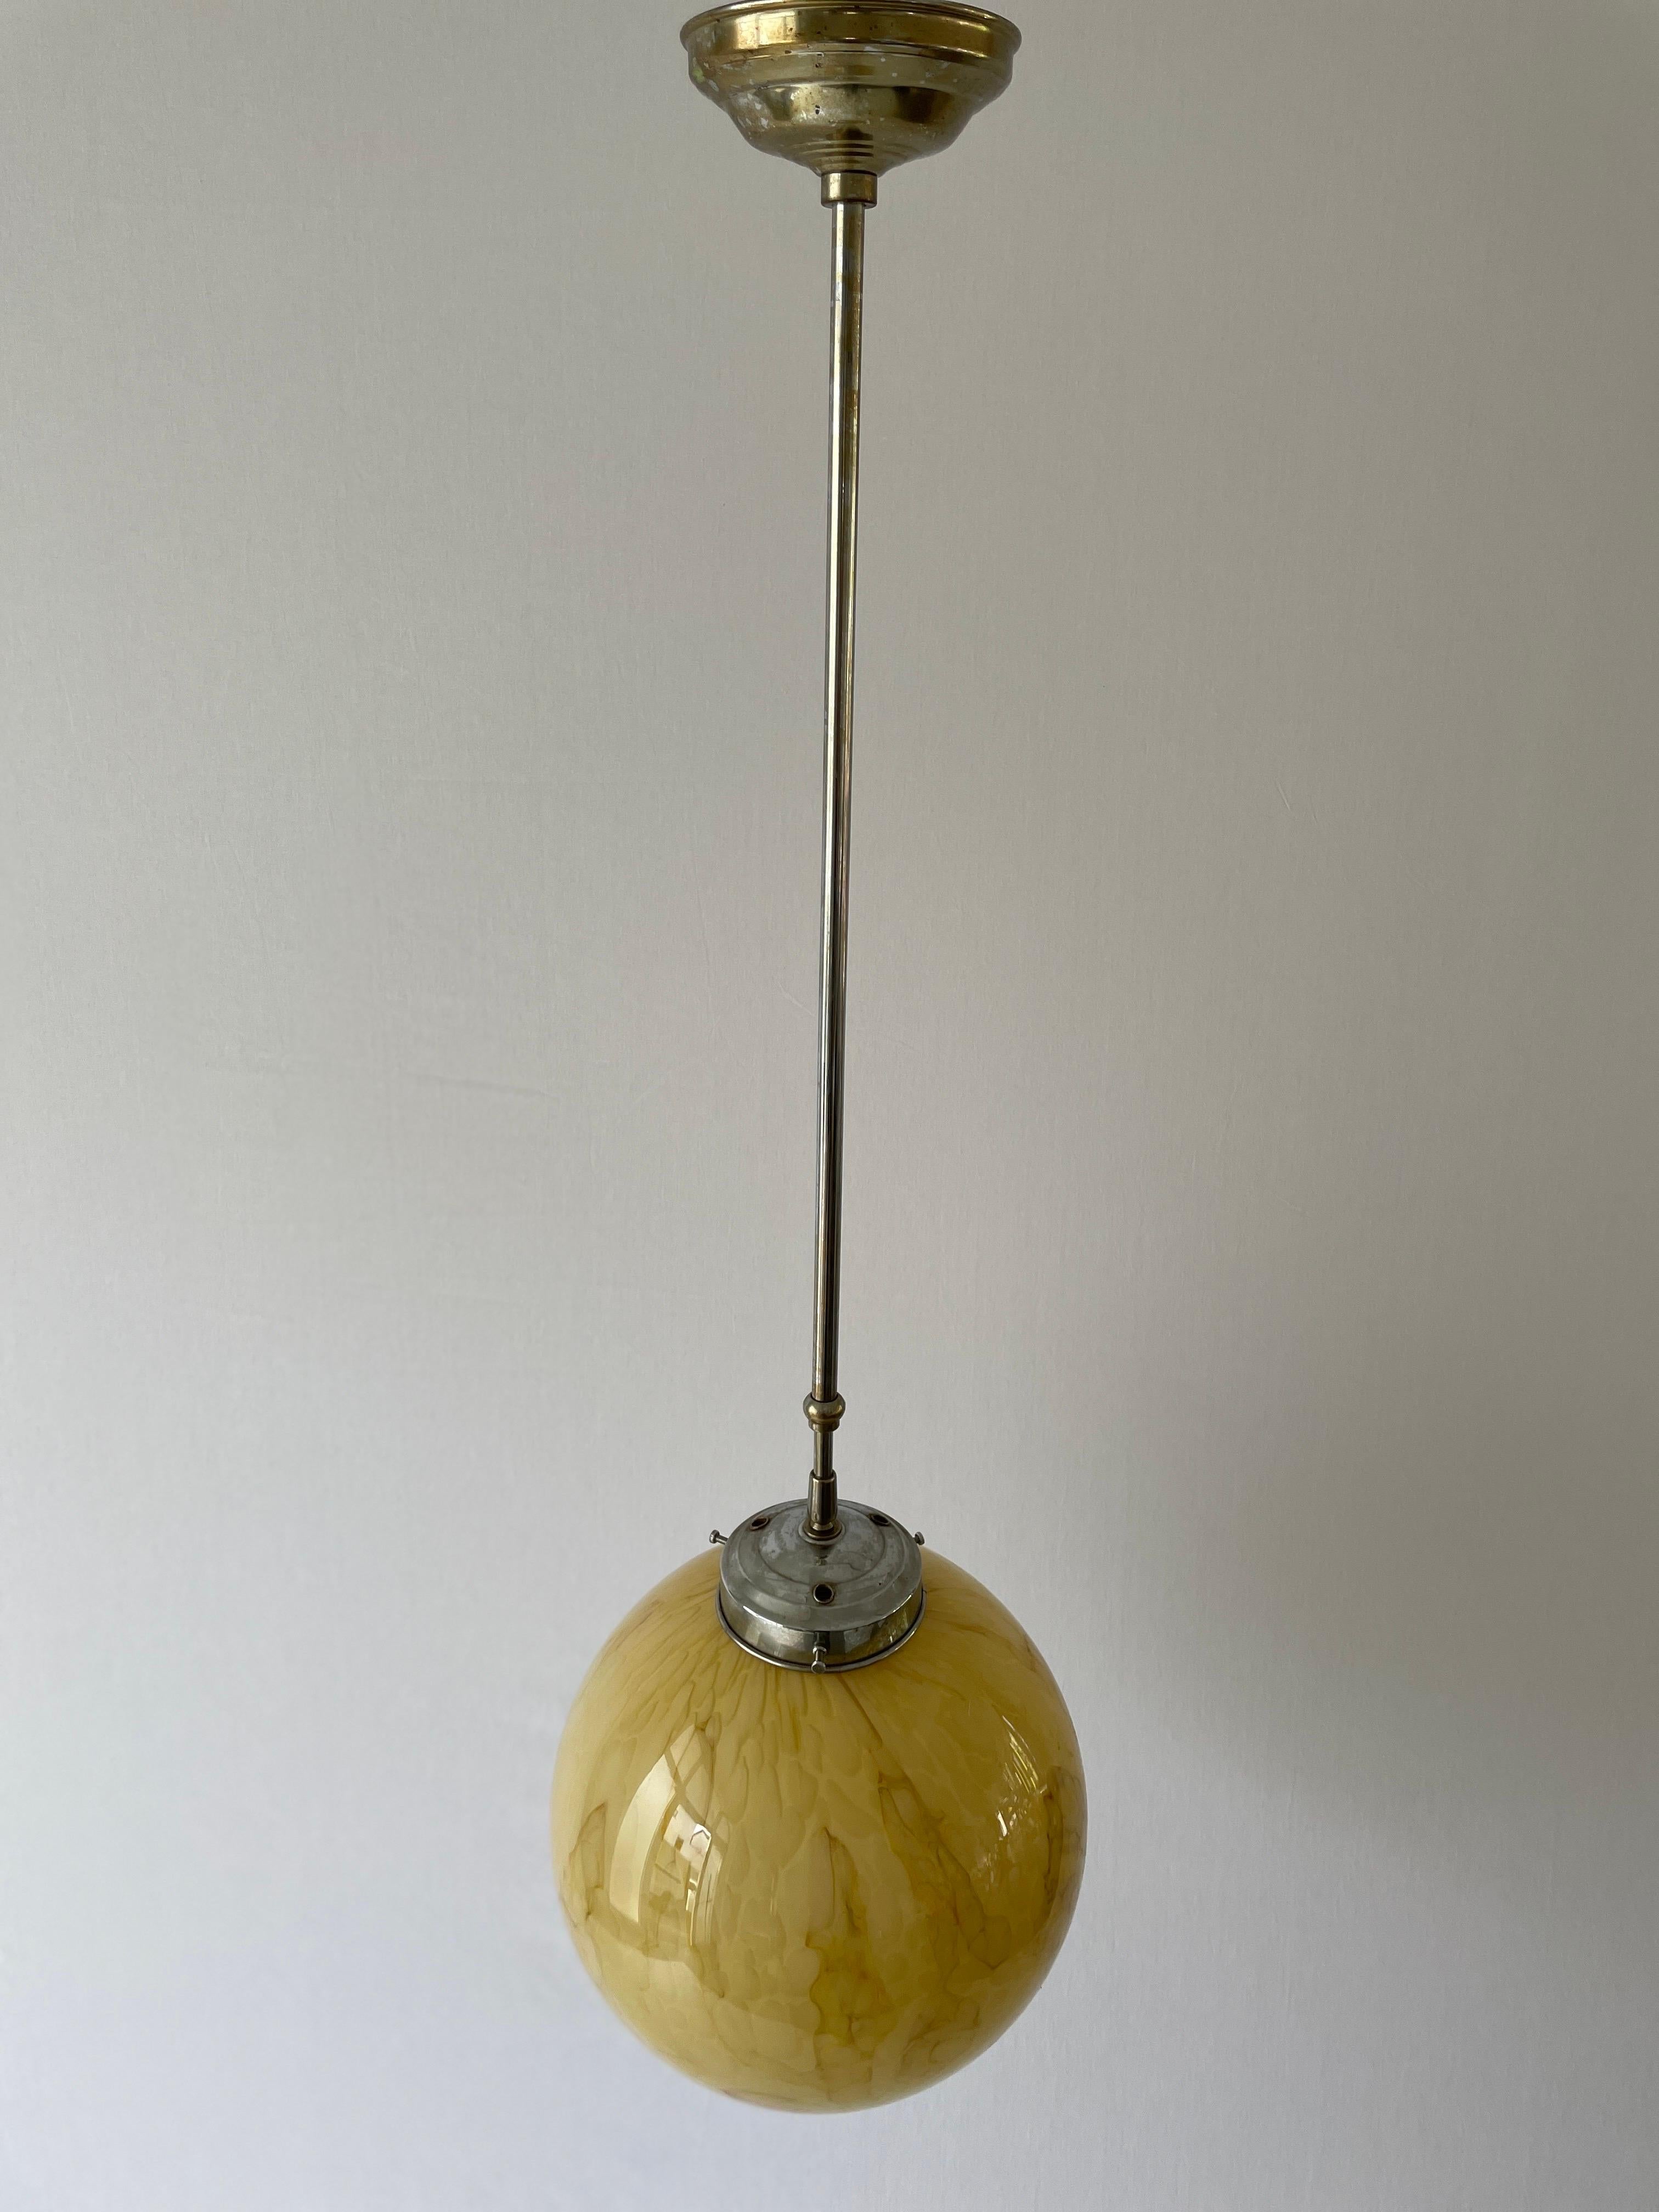 Art Deco Exceptional Church Lamp with Yellow Glass Ball , 1930s, Germany For Sale 2